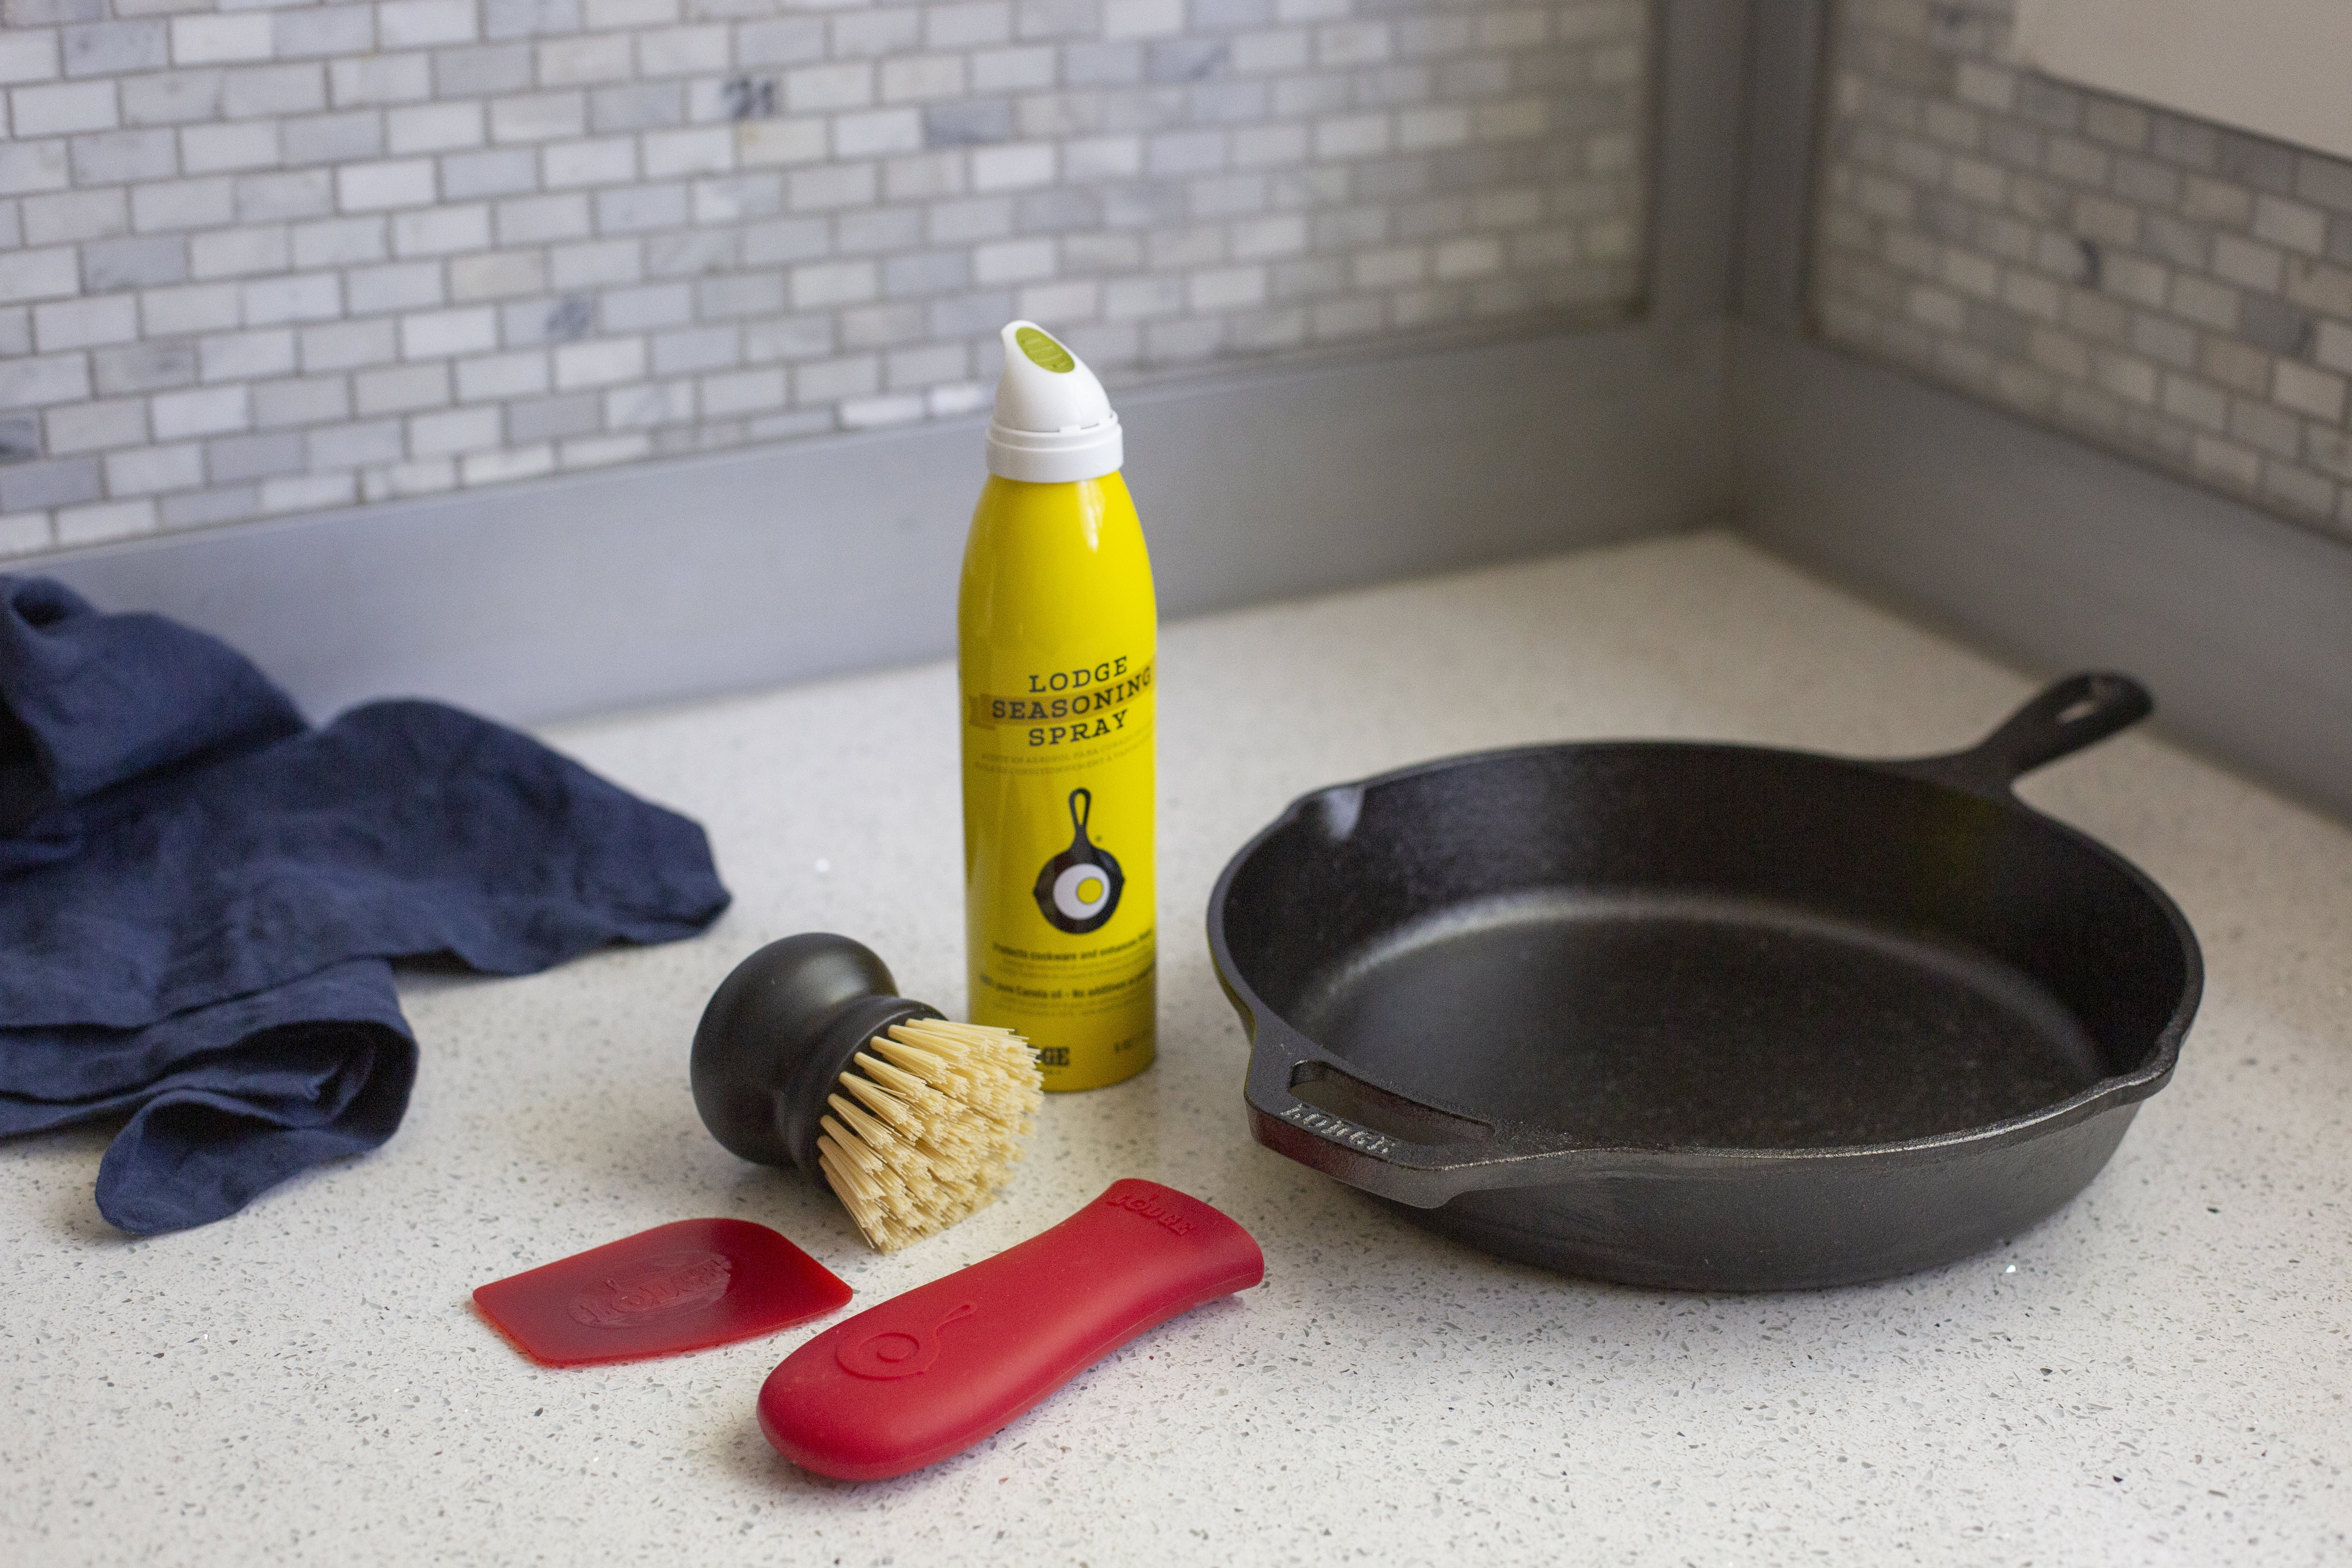 4 Piece Cast Iron Cleaning Kit